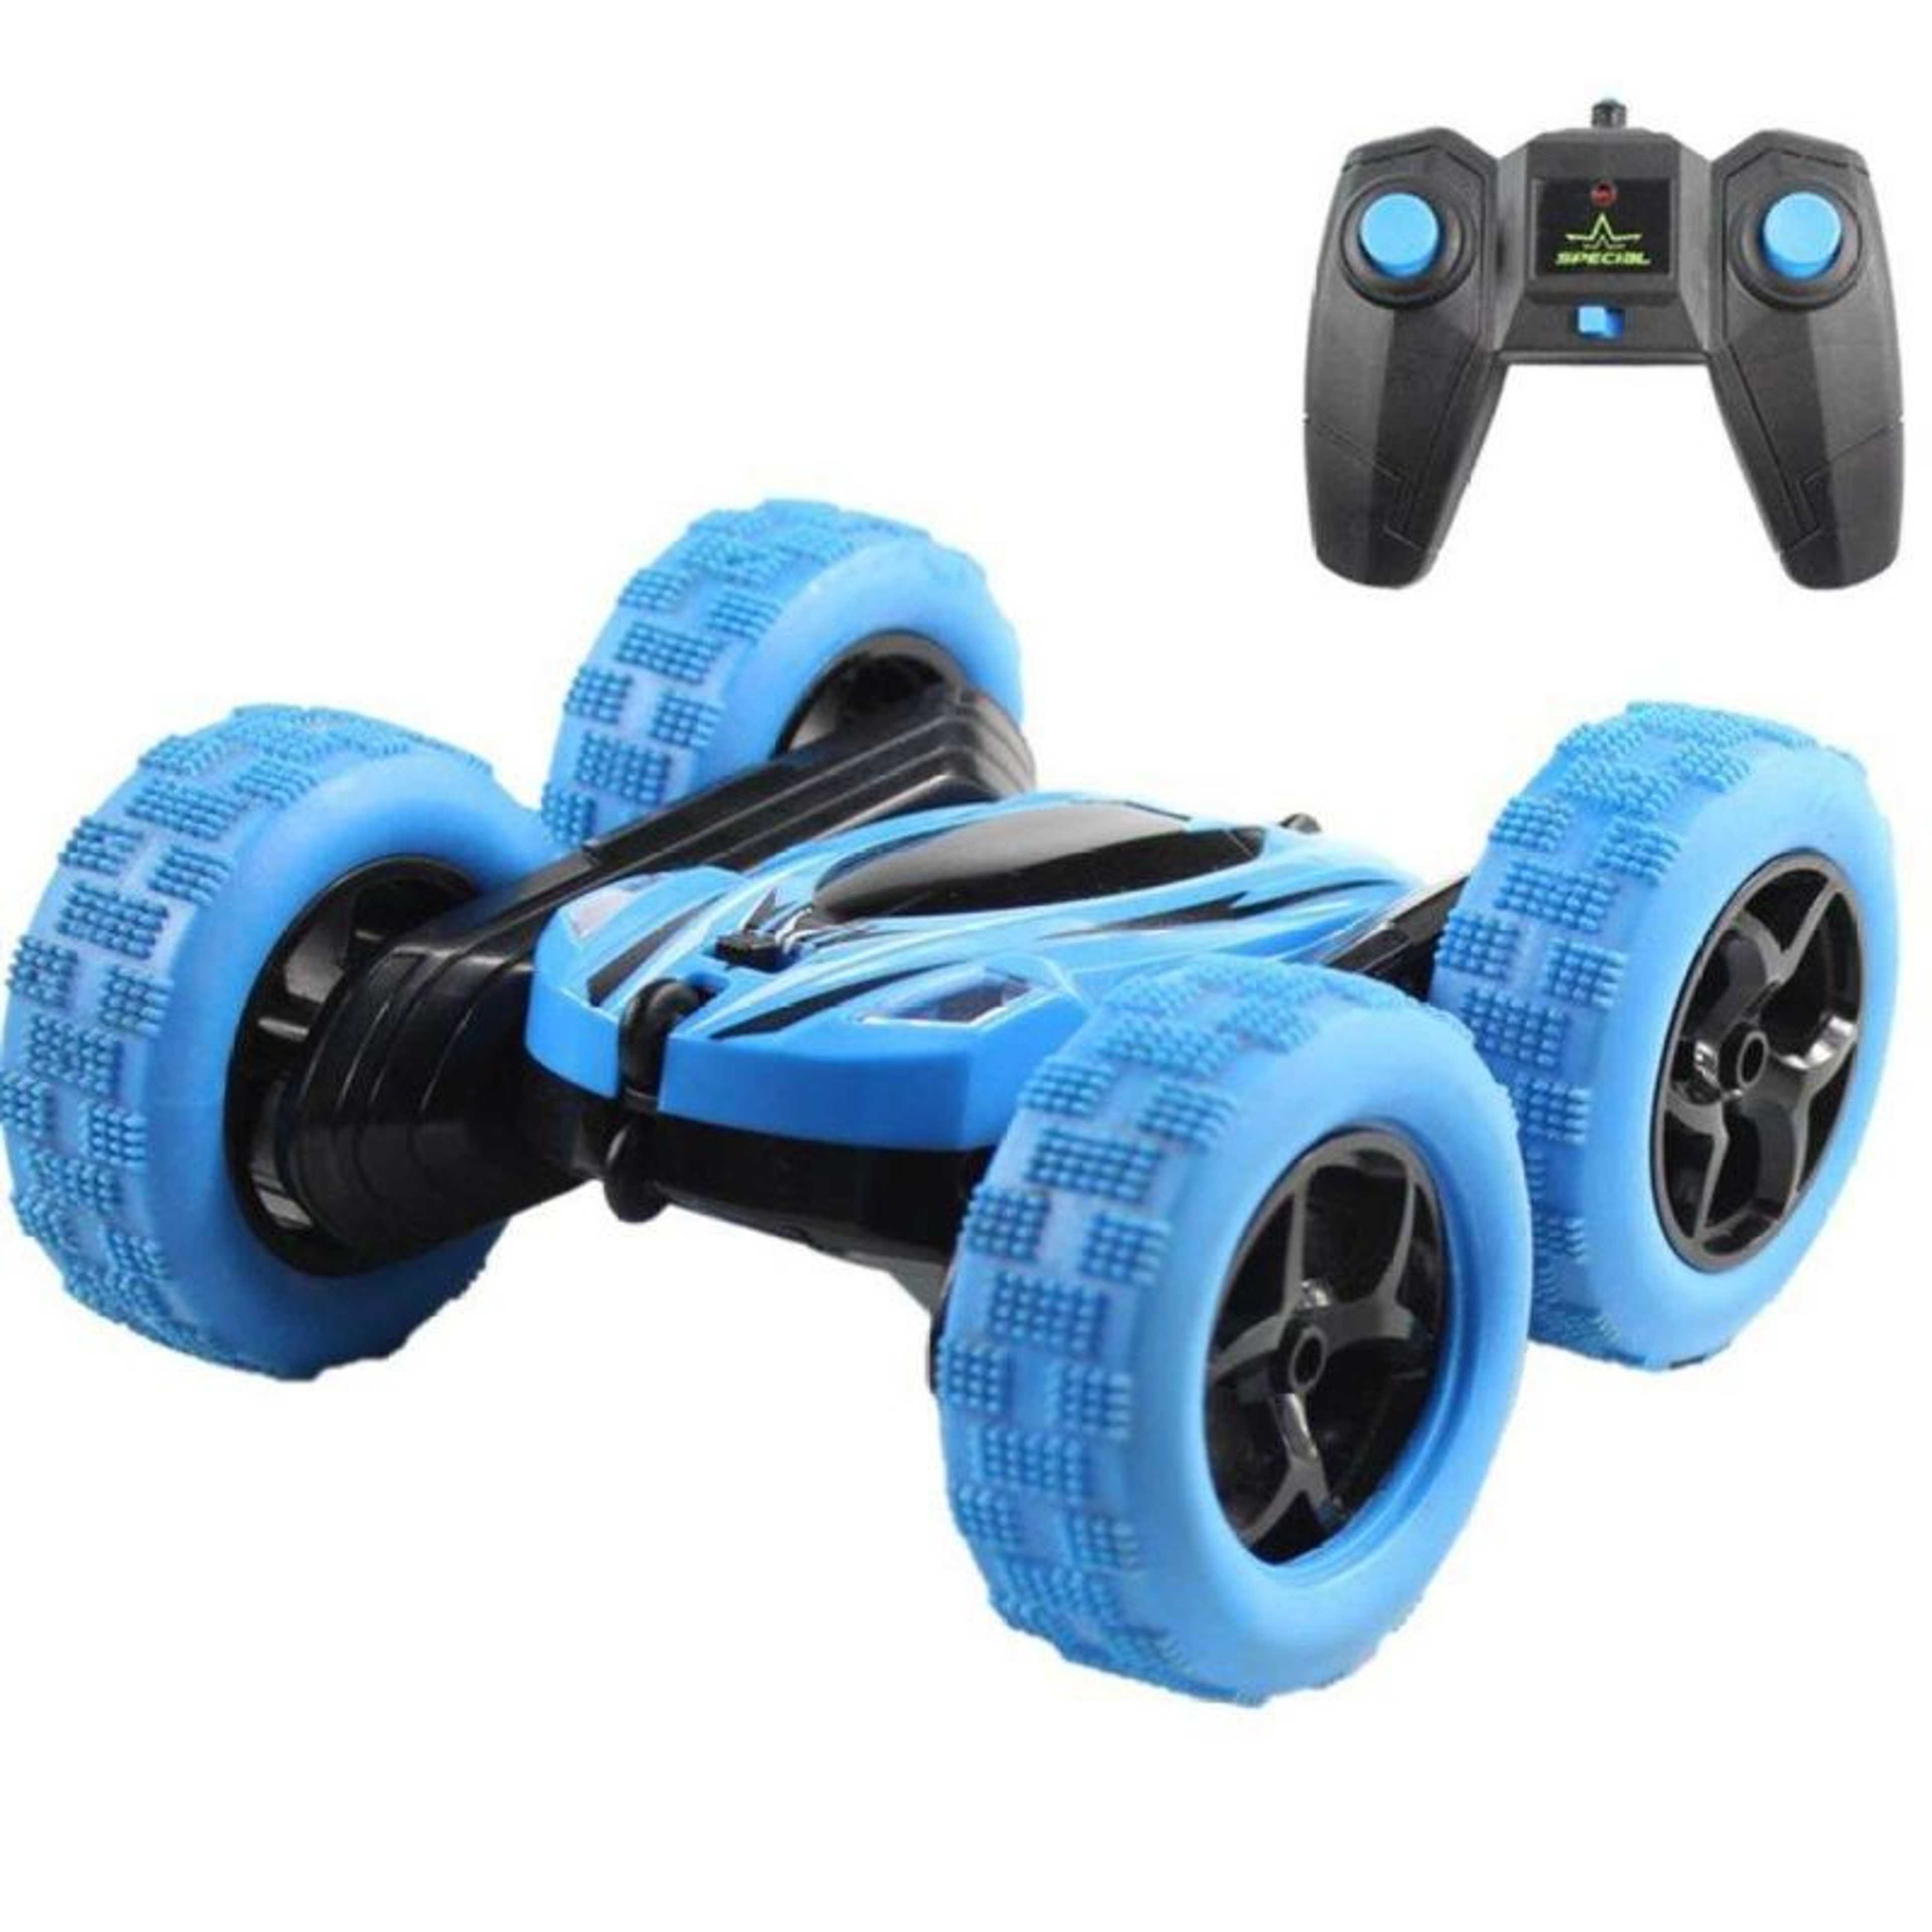 [ Best Toys for Gifts ] Rechargeable Double Sided Stunt Drift Deformation Buggy Remote Control Car Rock Crawler Roll Car 360 Degree Flip Kids Robot RC Cars